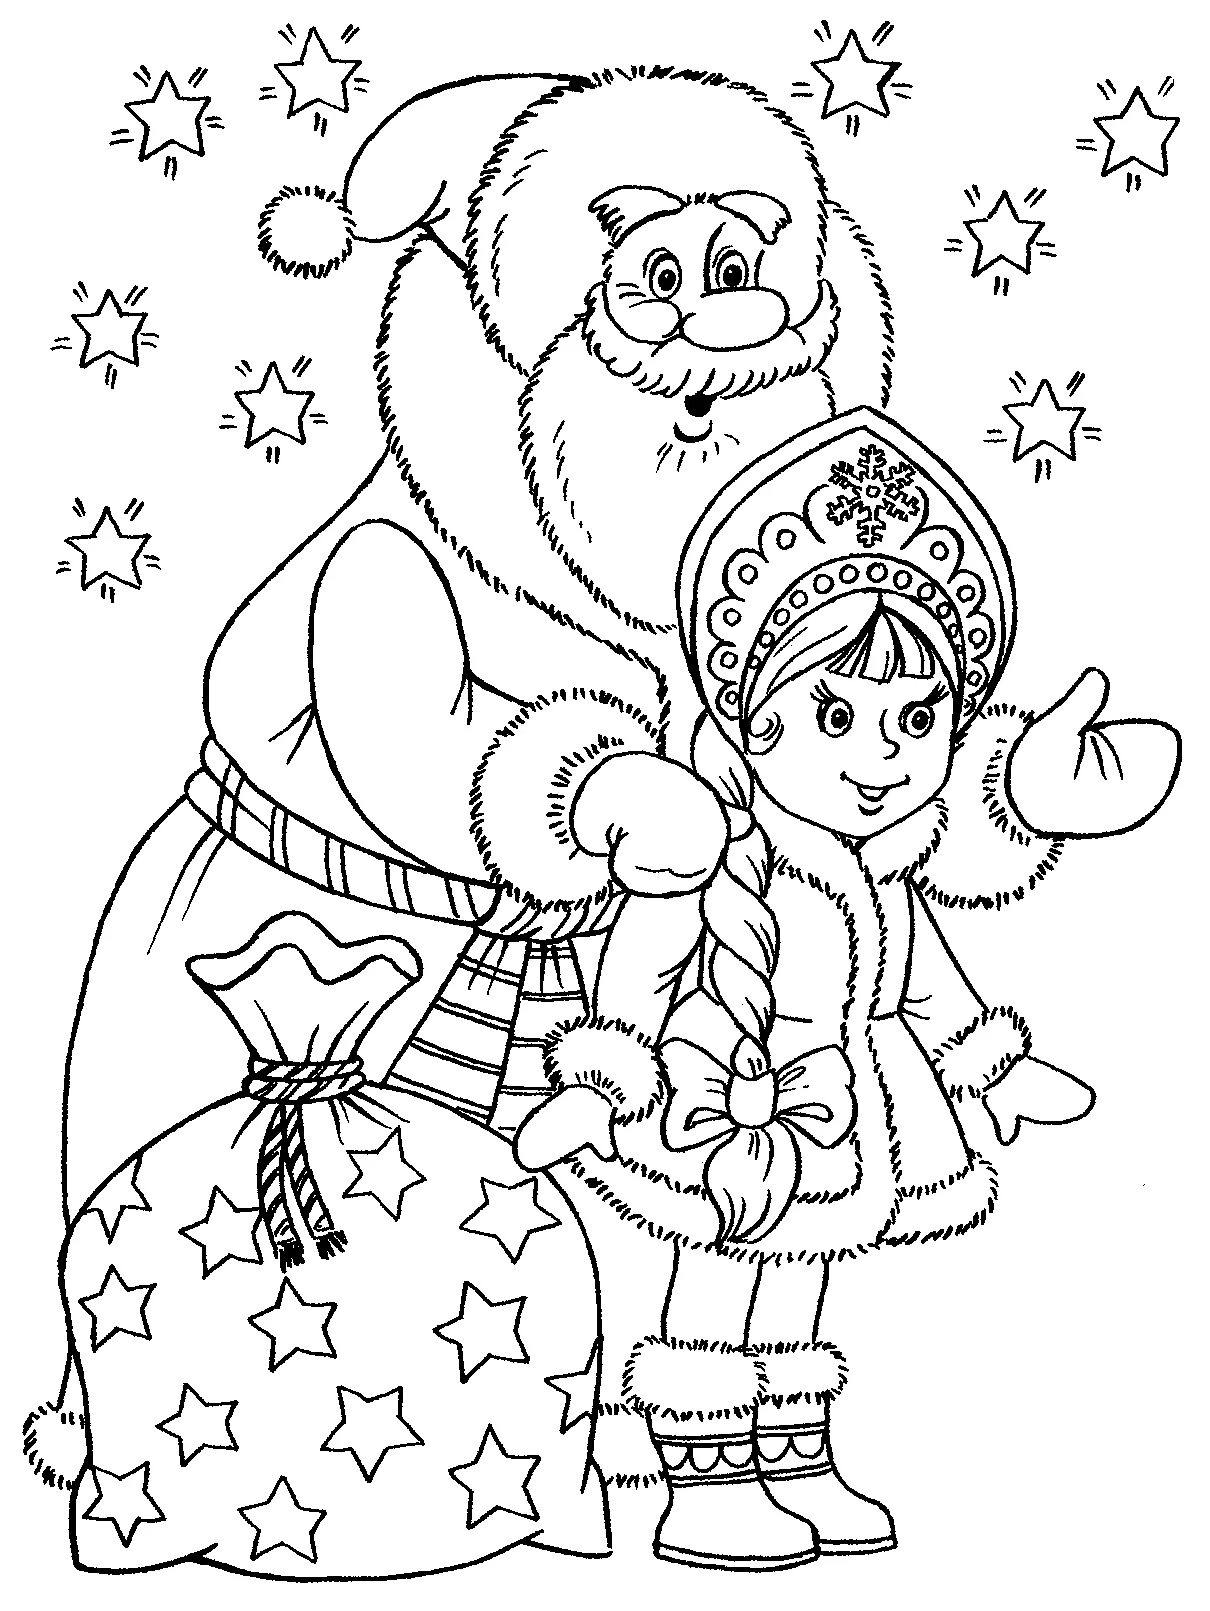 Coloring book wonderful Santa Claus and Snow Maiden